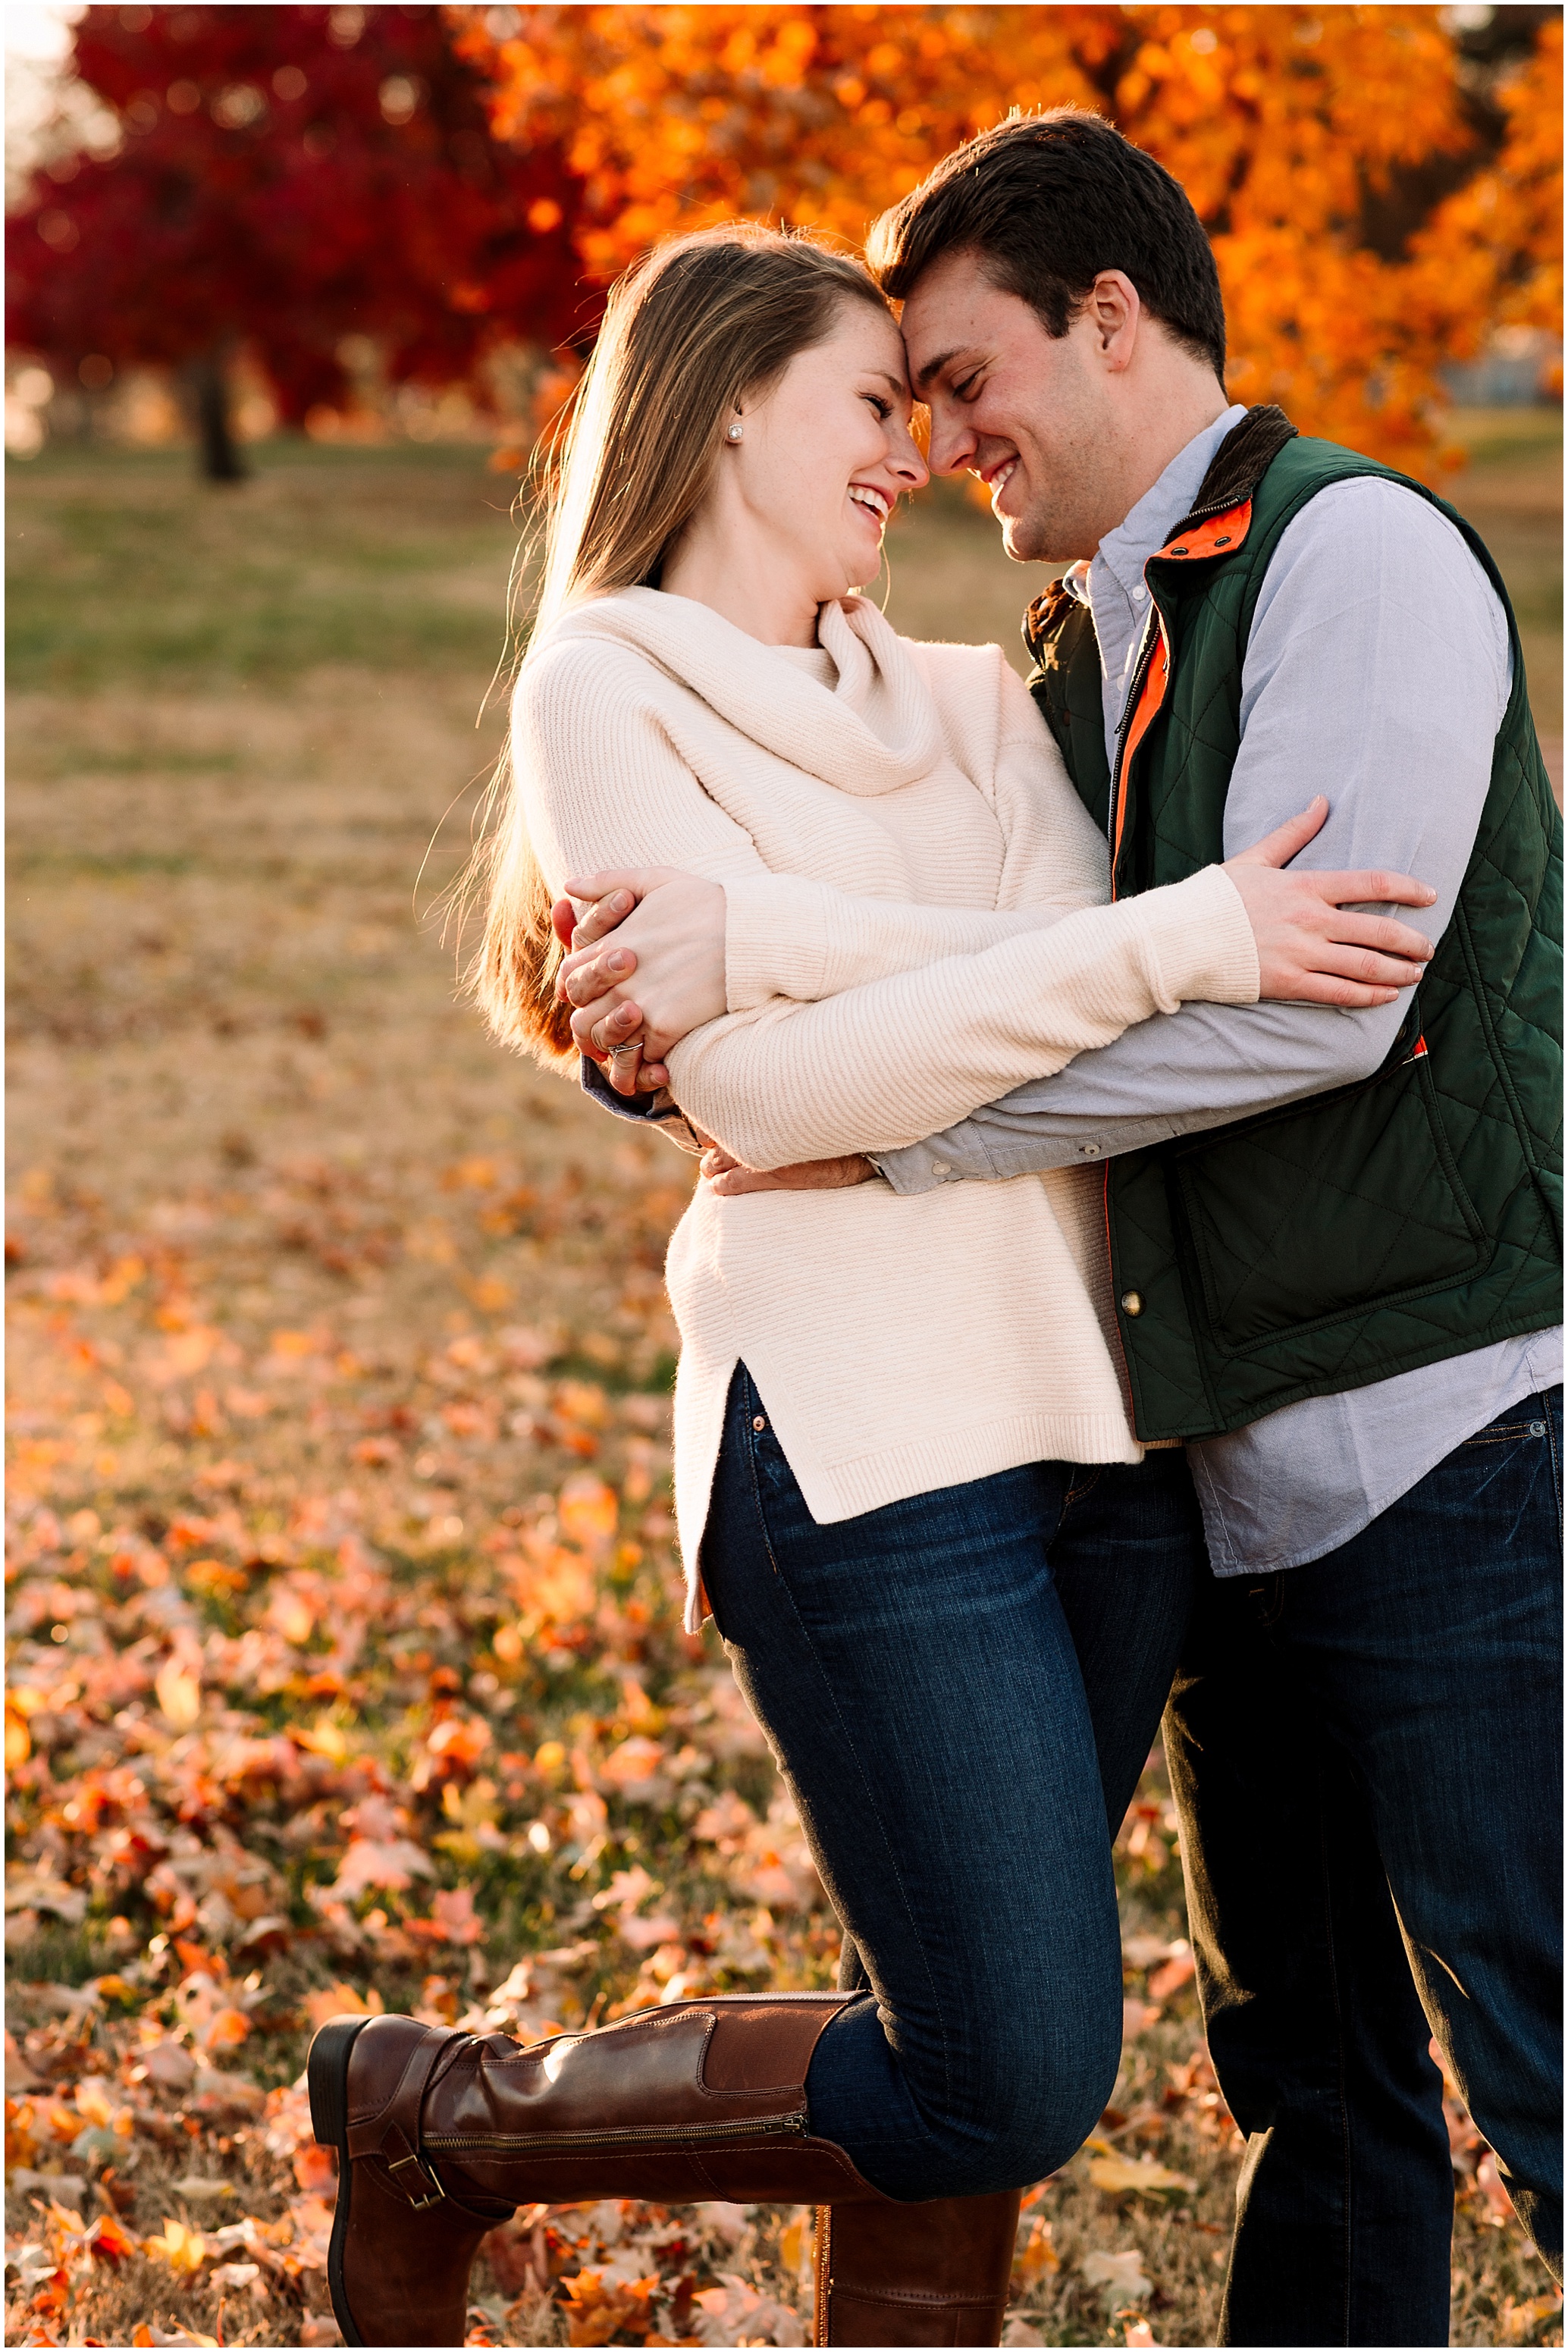 Hannah Leigh Photography Baltimore Engagement Session MD_6975.jpg